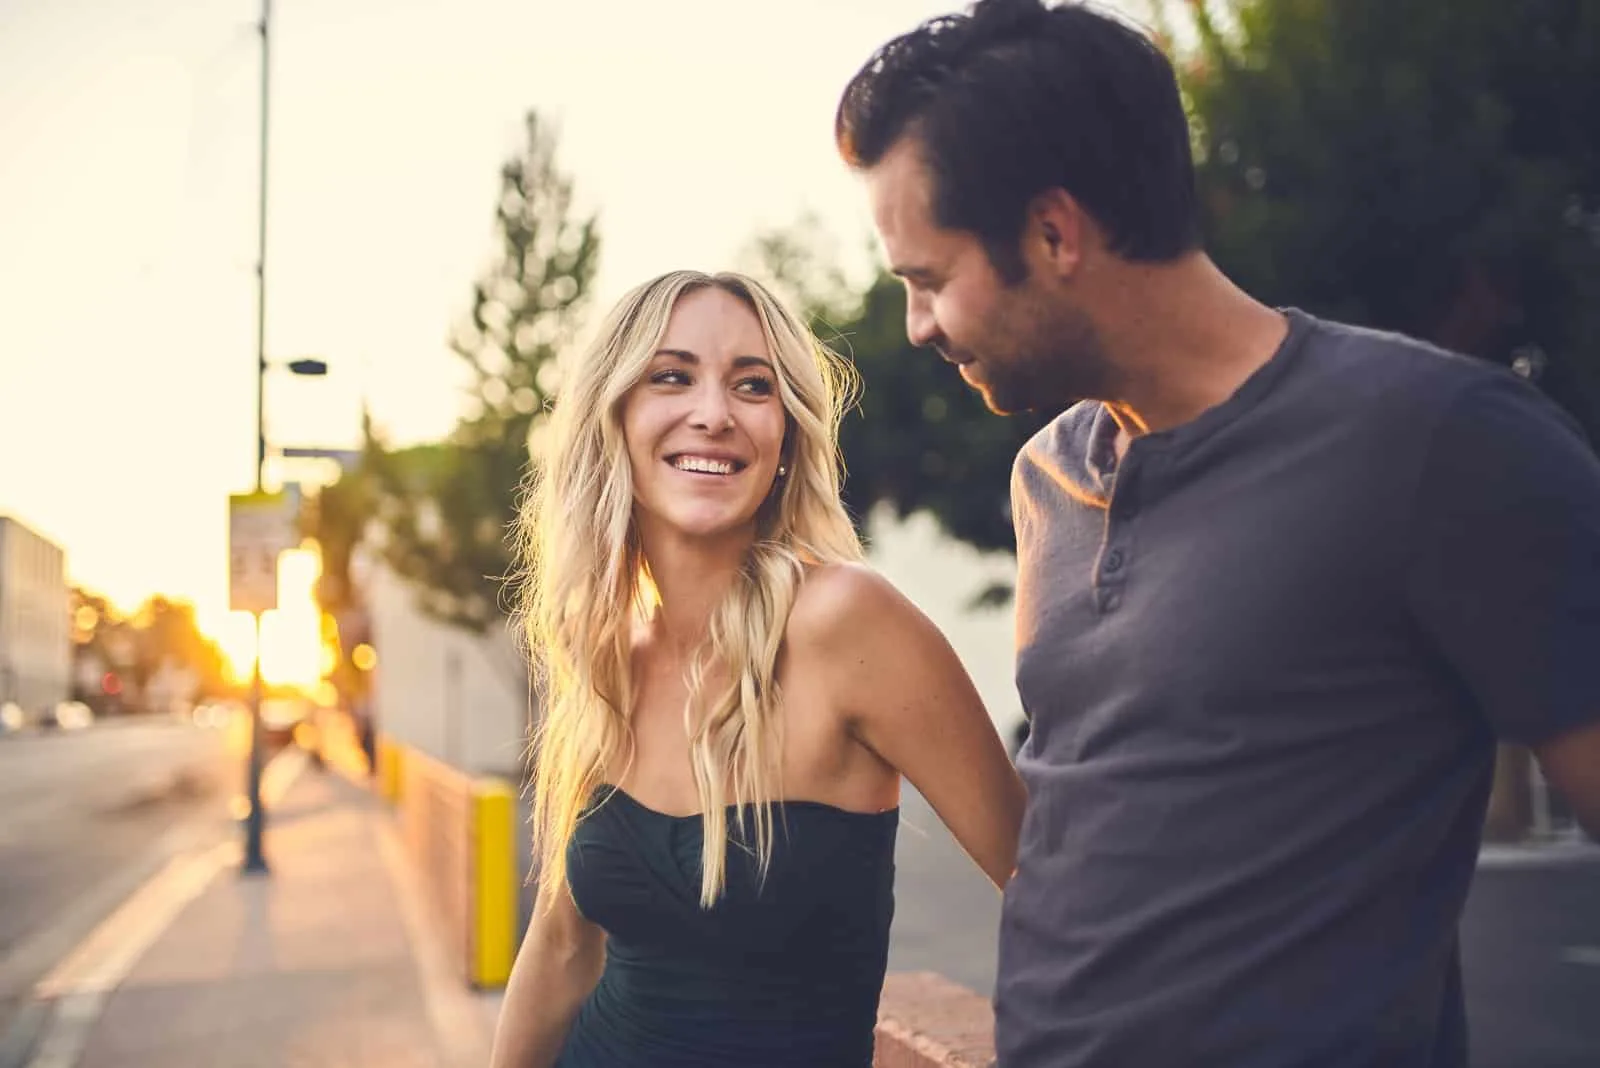 blonde woman smiling while looking at man outdoor